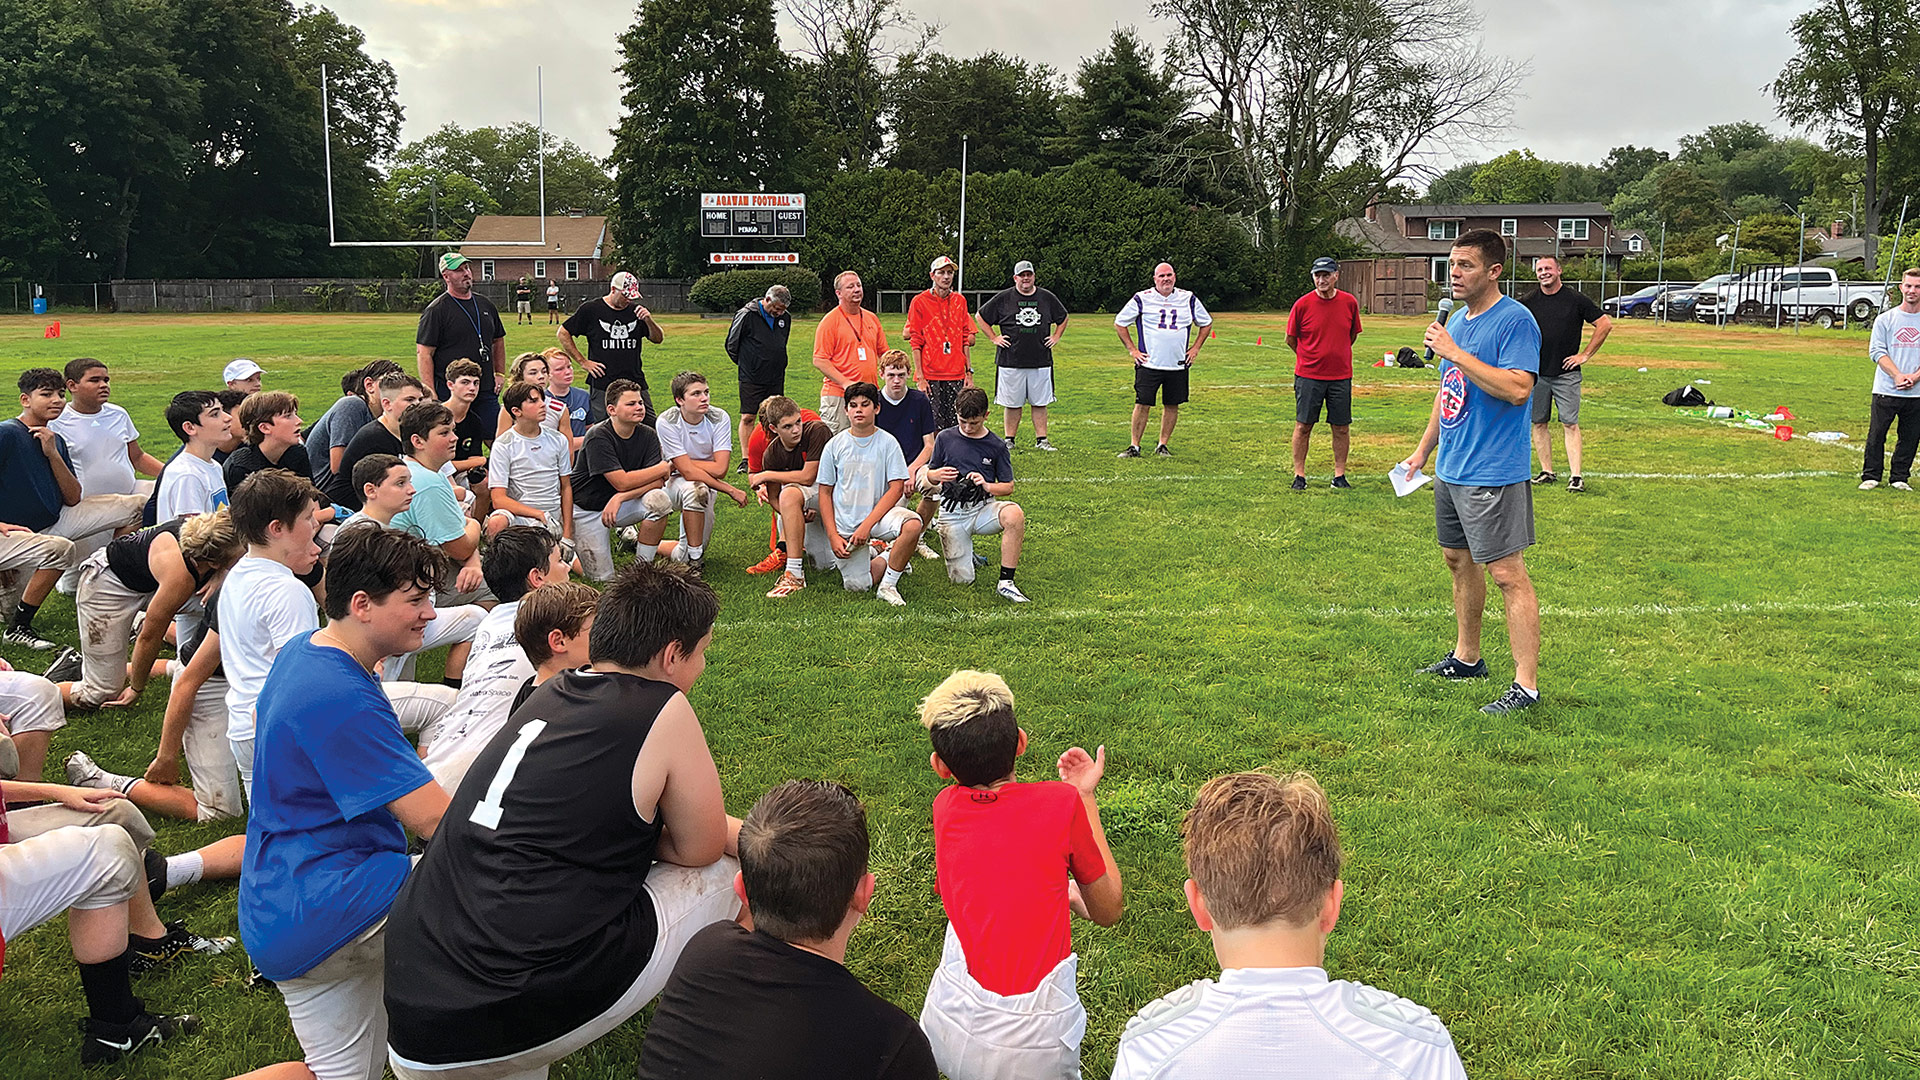 On Aug. 23, state Sen. John Velis spent time with the Agawam Youth Football Assoc